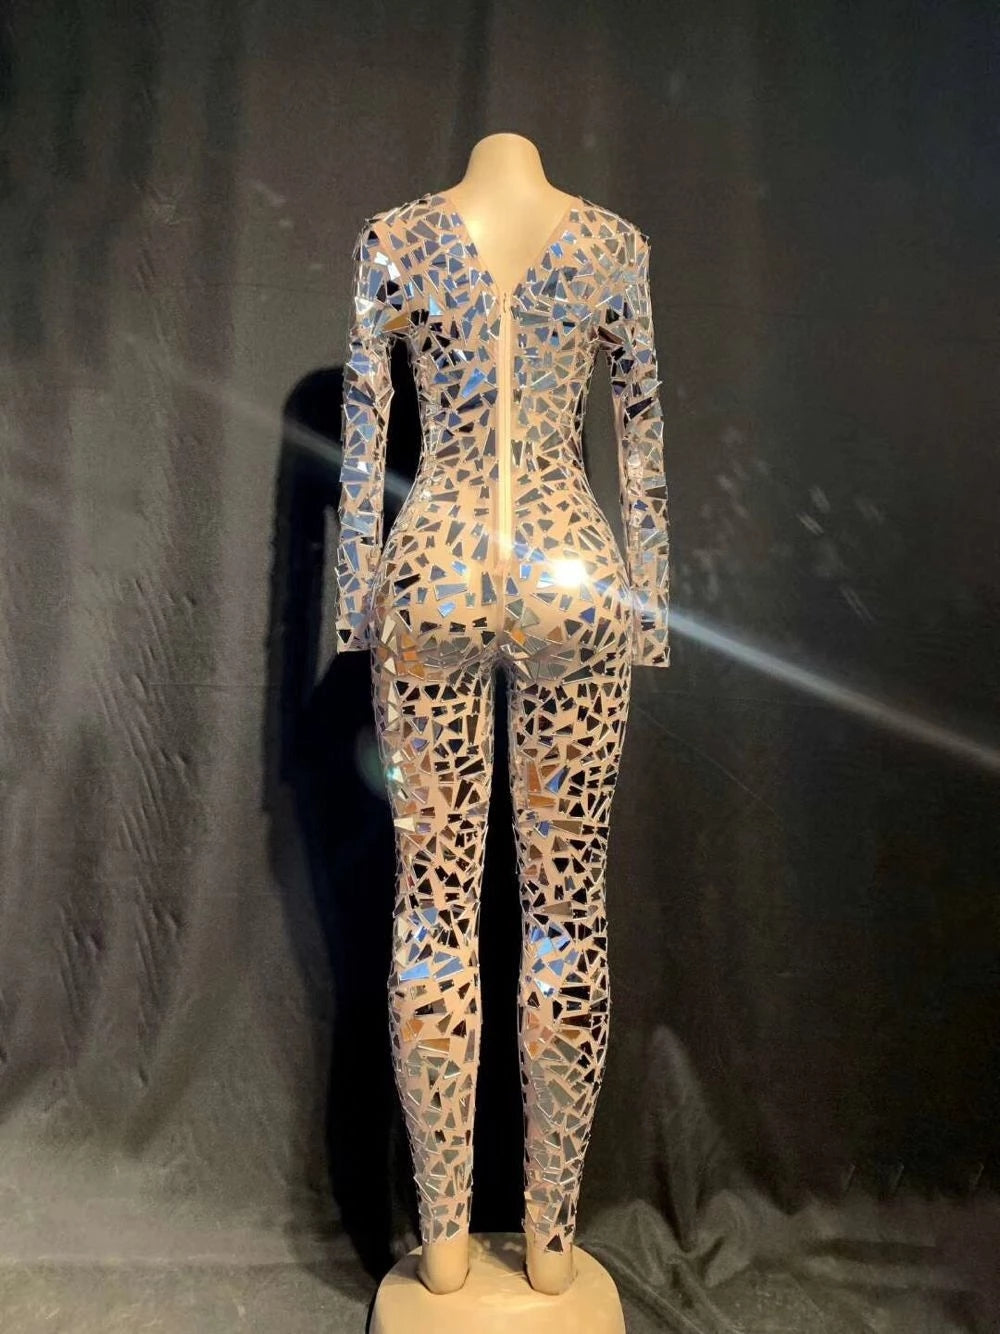 Too Much To Handle Sequin Jumpsuit - Body By J'ne